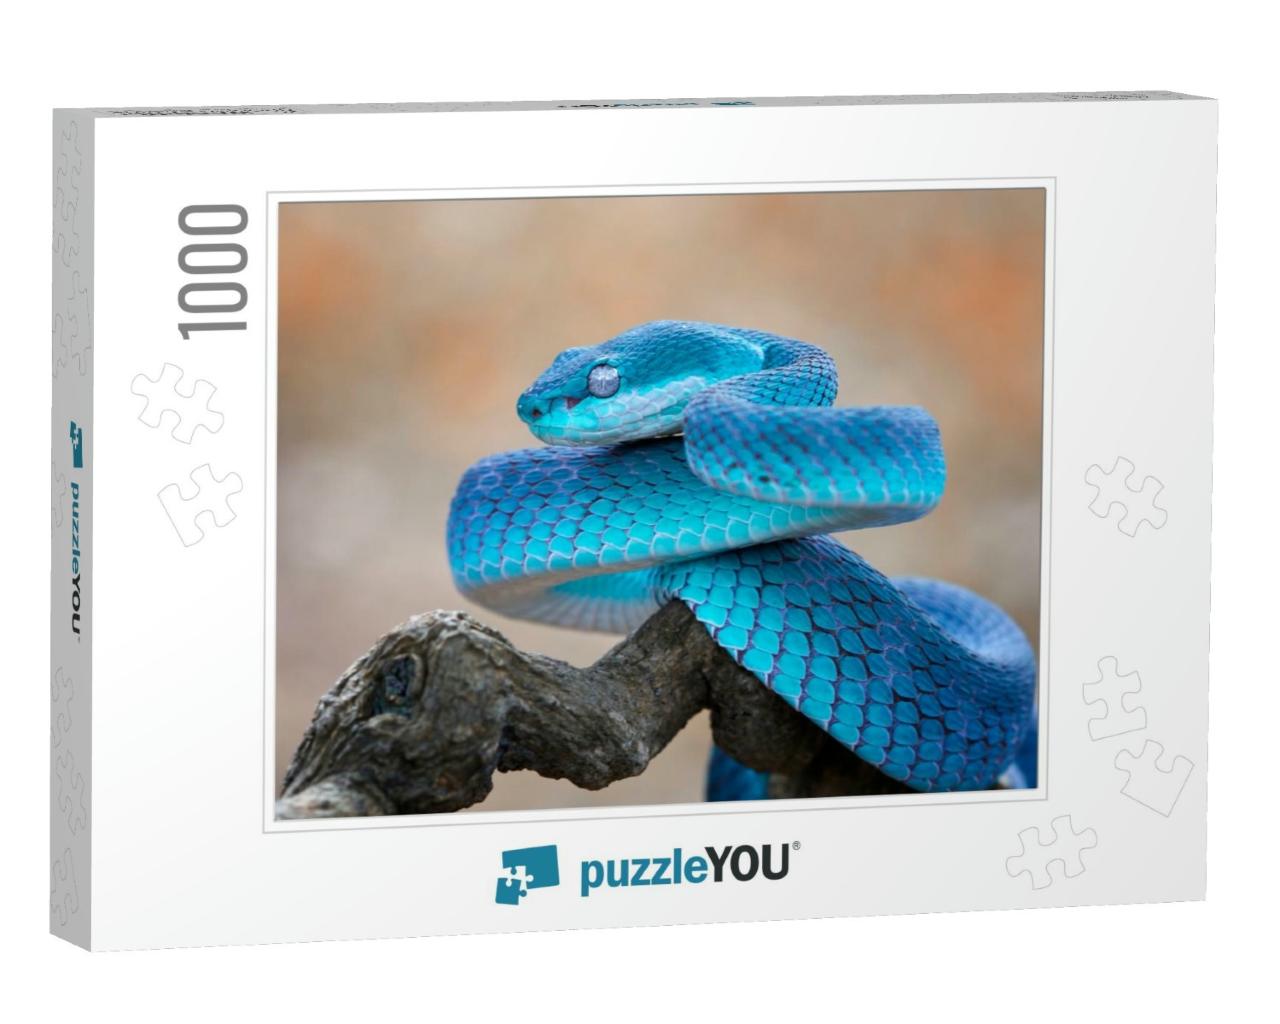 Blue Viper Snake Closeup Face, Viper Snake, Blue Insulari... Jigsaw Puzzle with 1000 pieces